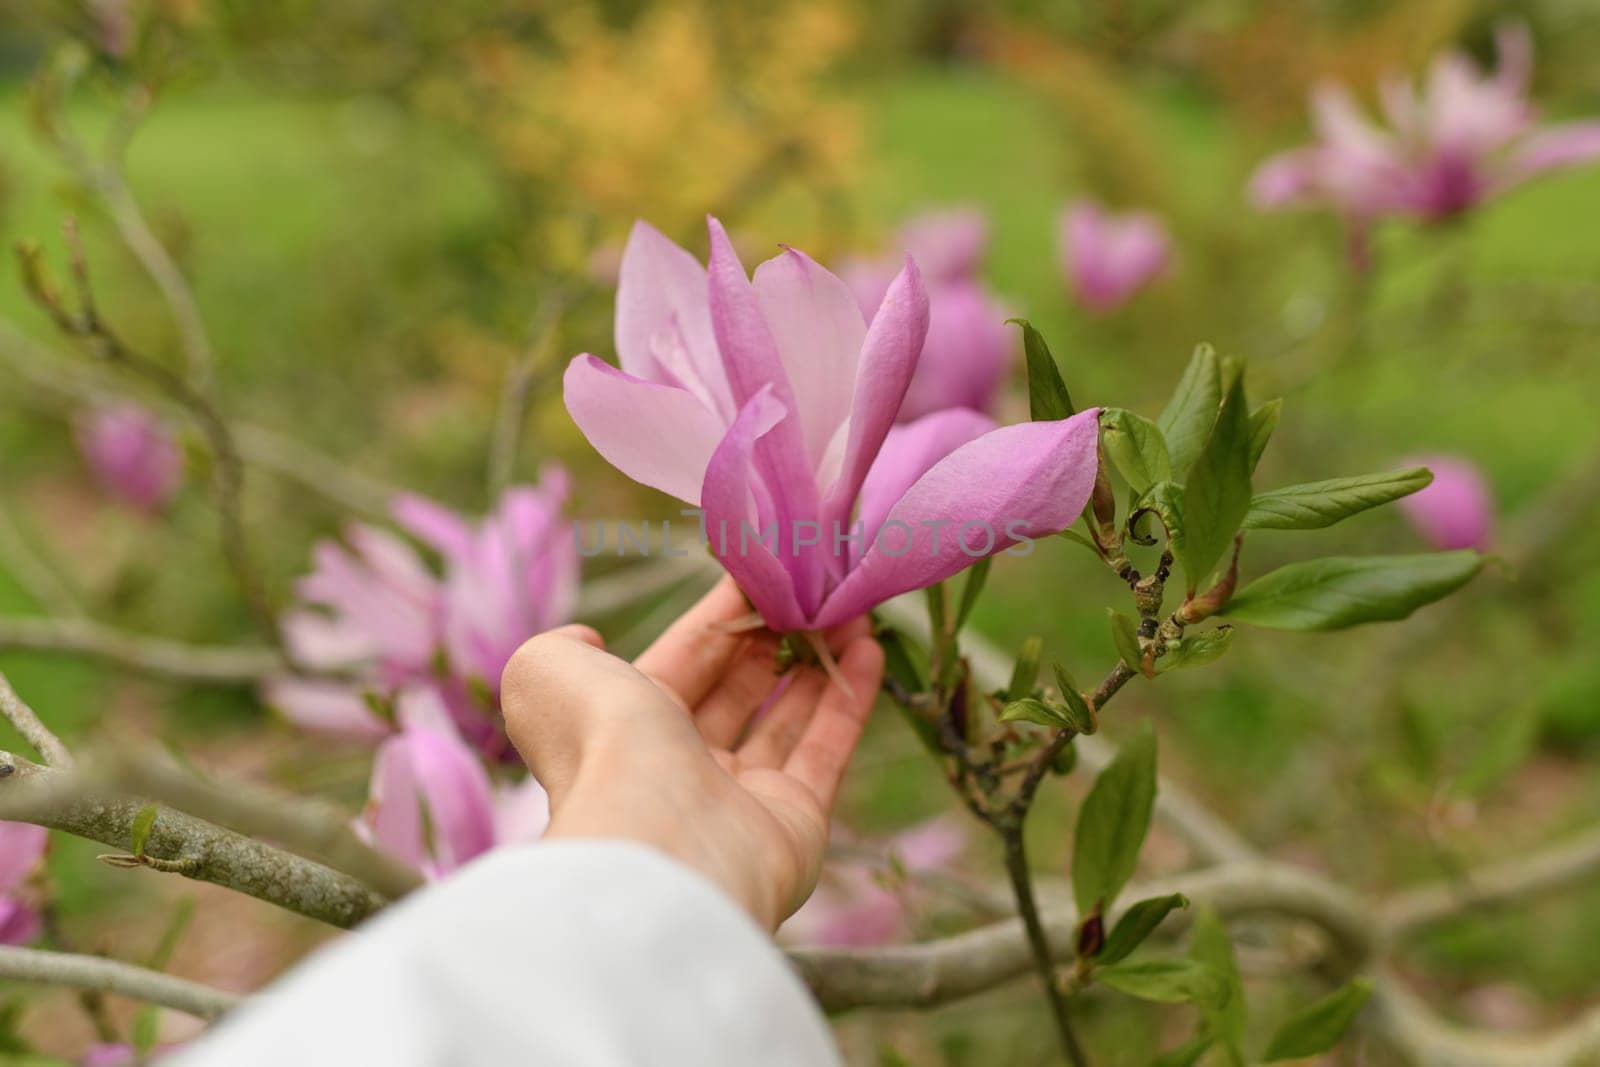 A woman's hand touches a magnolia flower by Godi